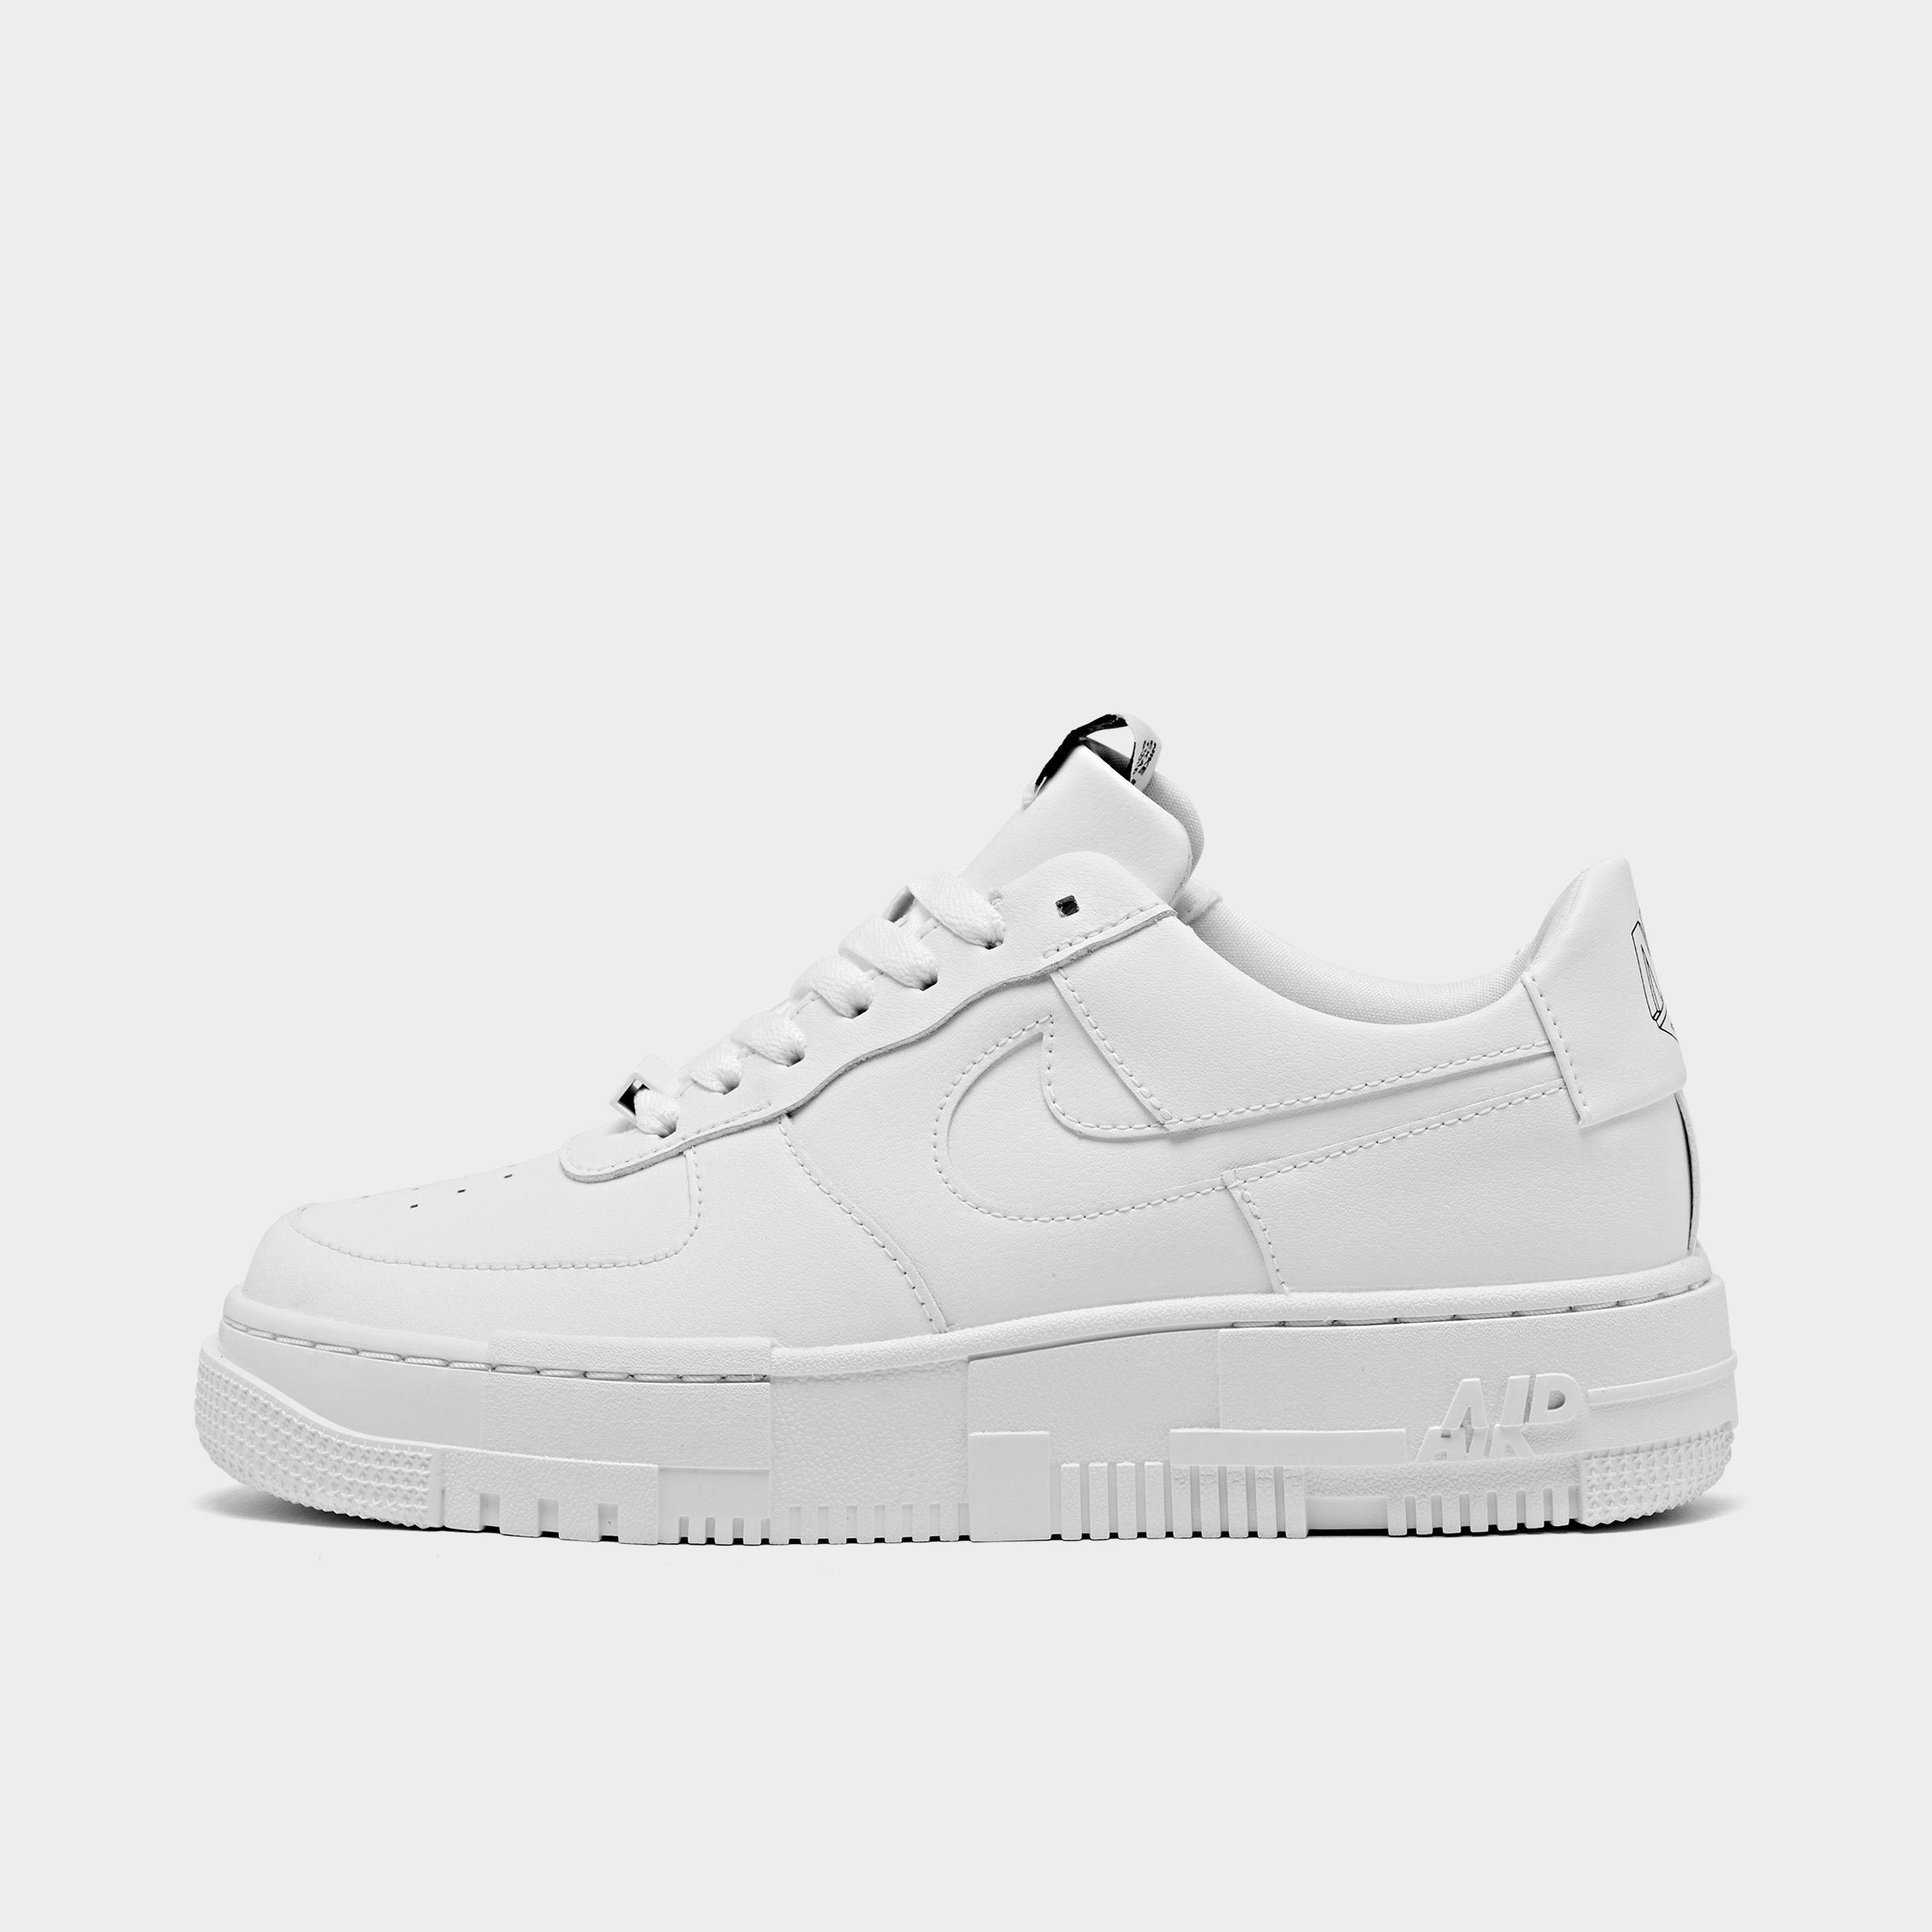 womens nike airforce 1 shoes